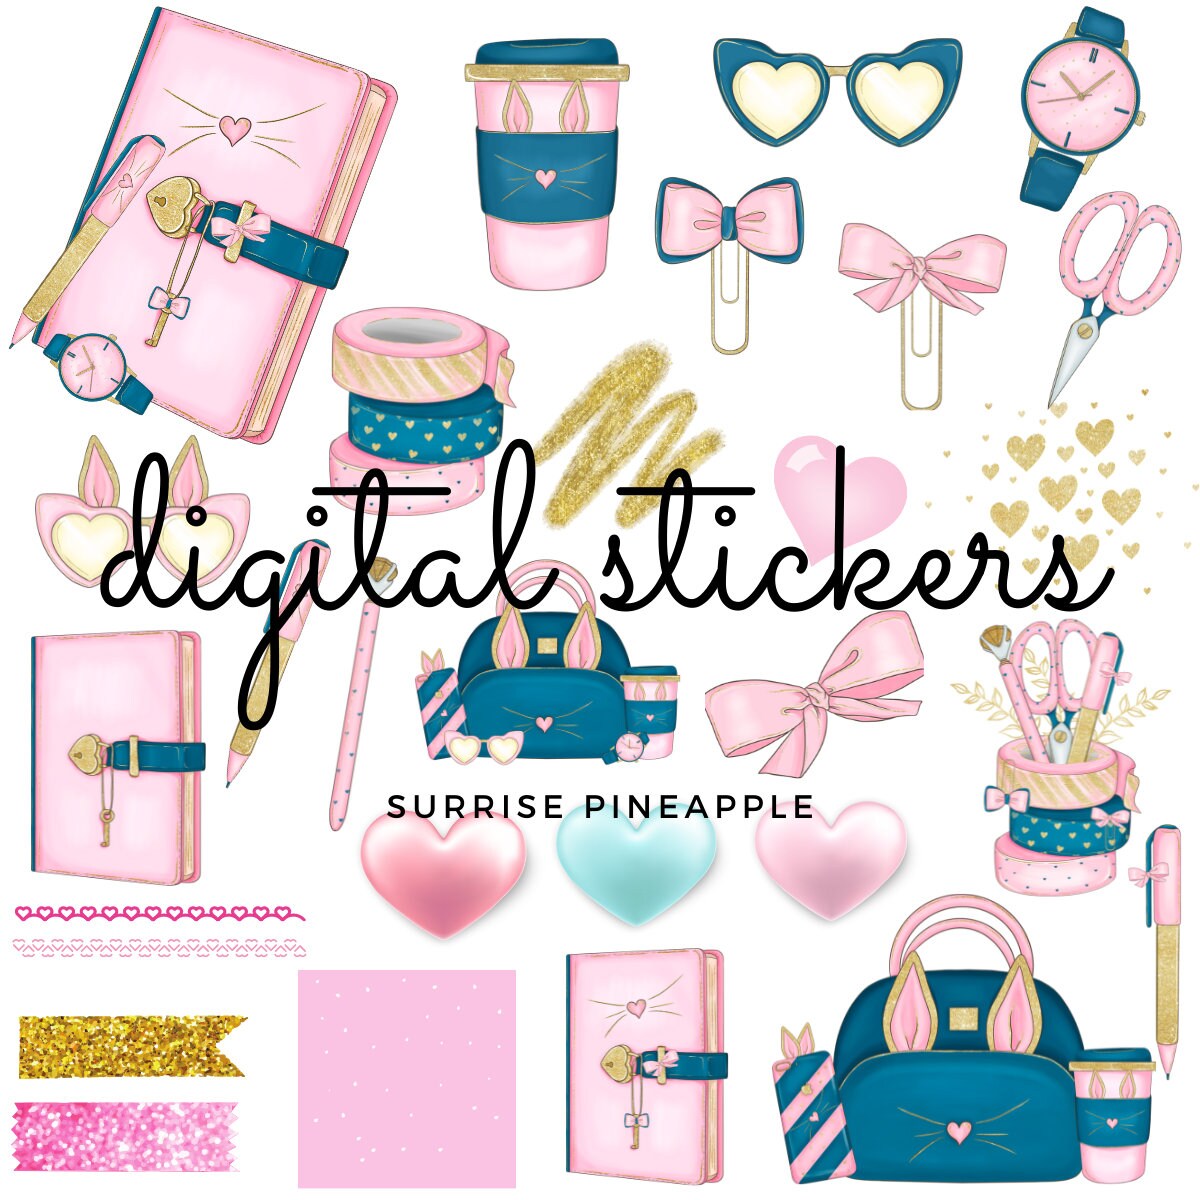 Kindle Stickers, Gallery posted by Trina